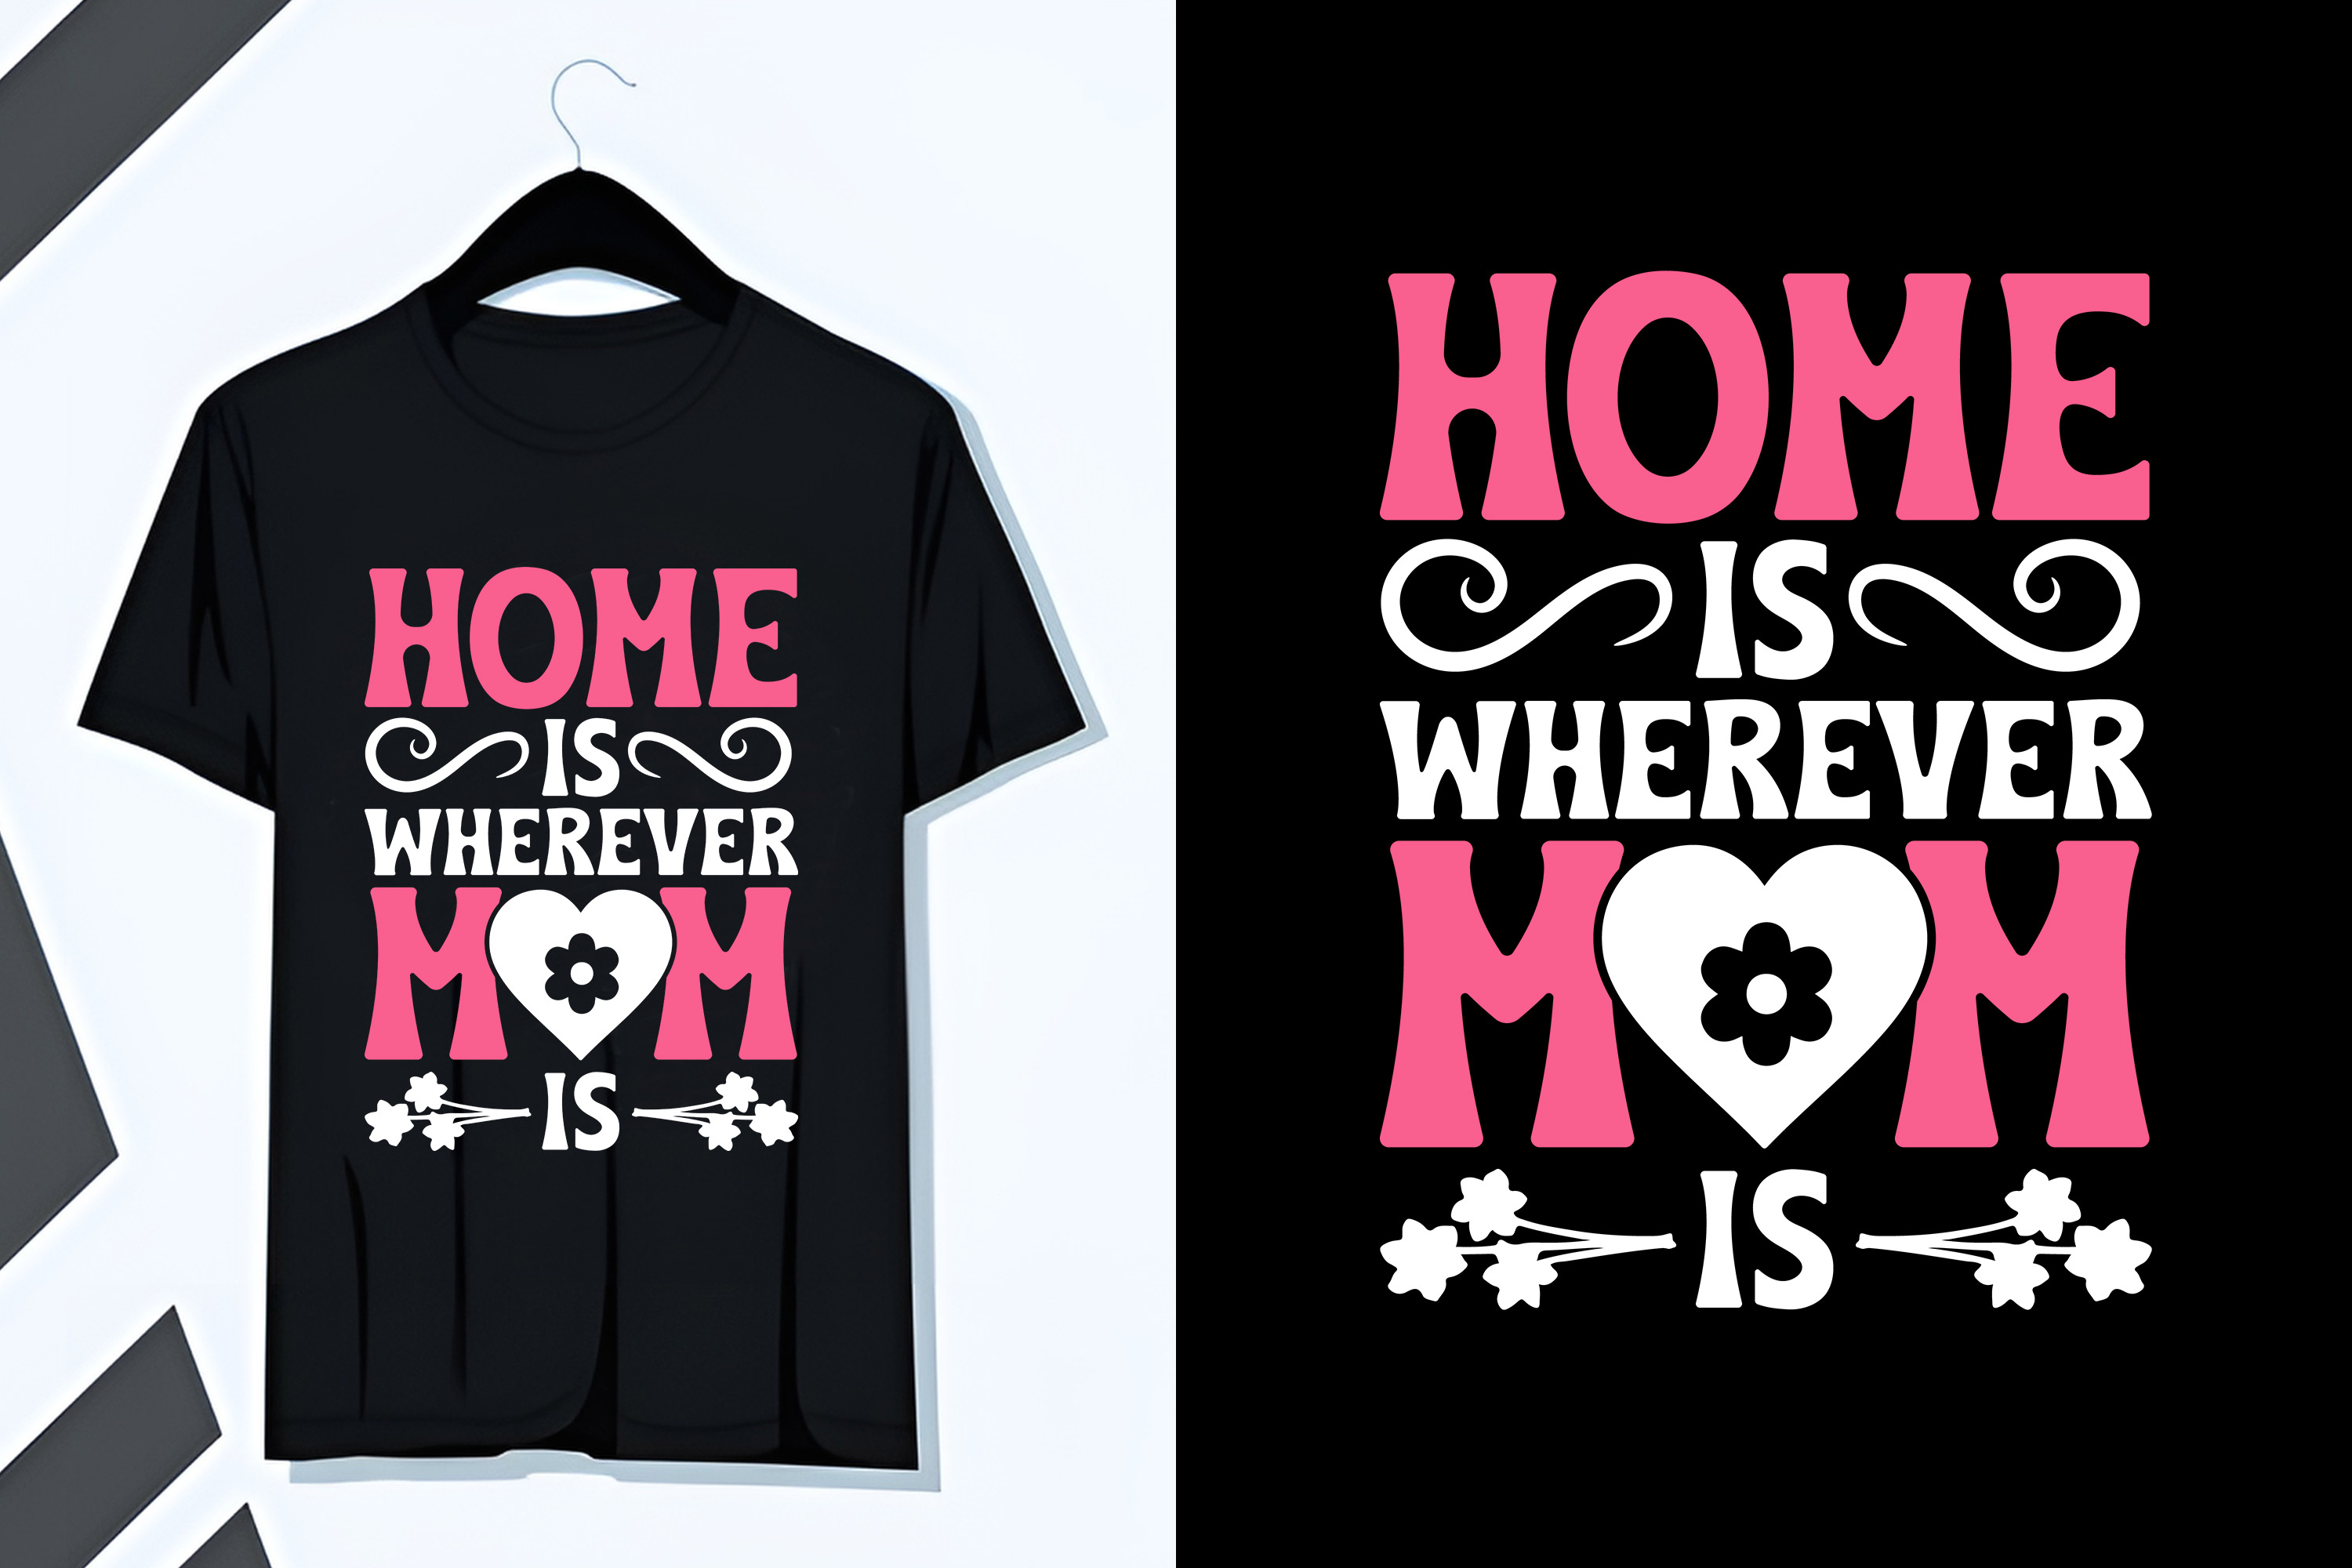 T - shirt that says home is wherever mom is.